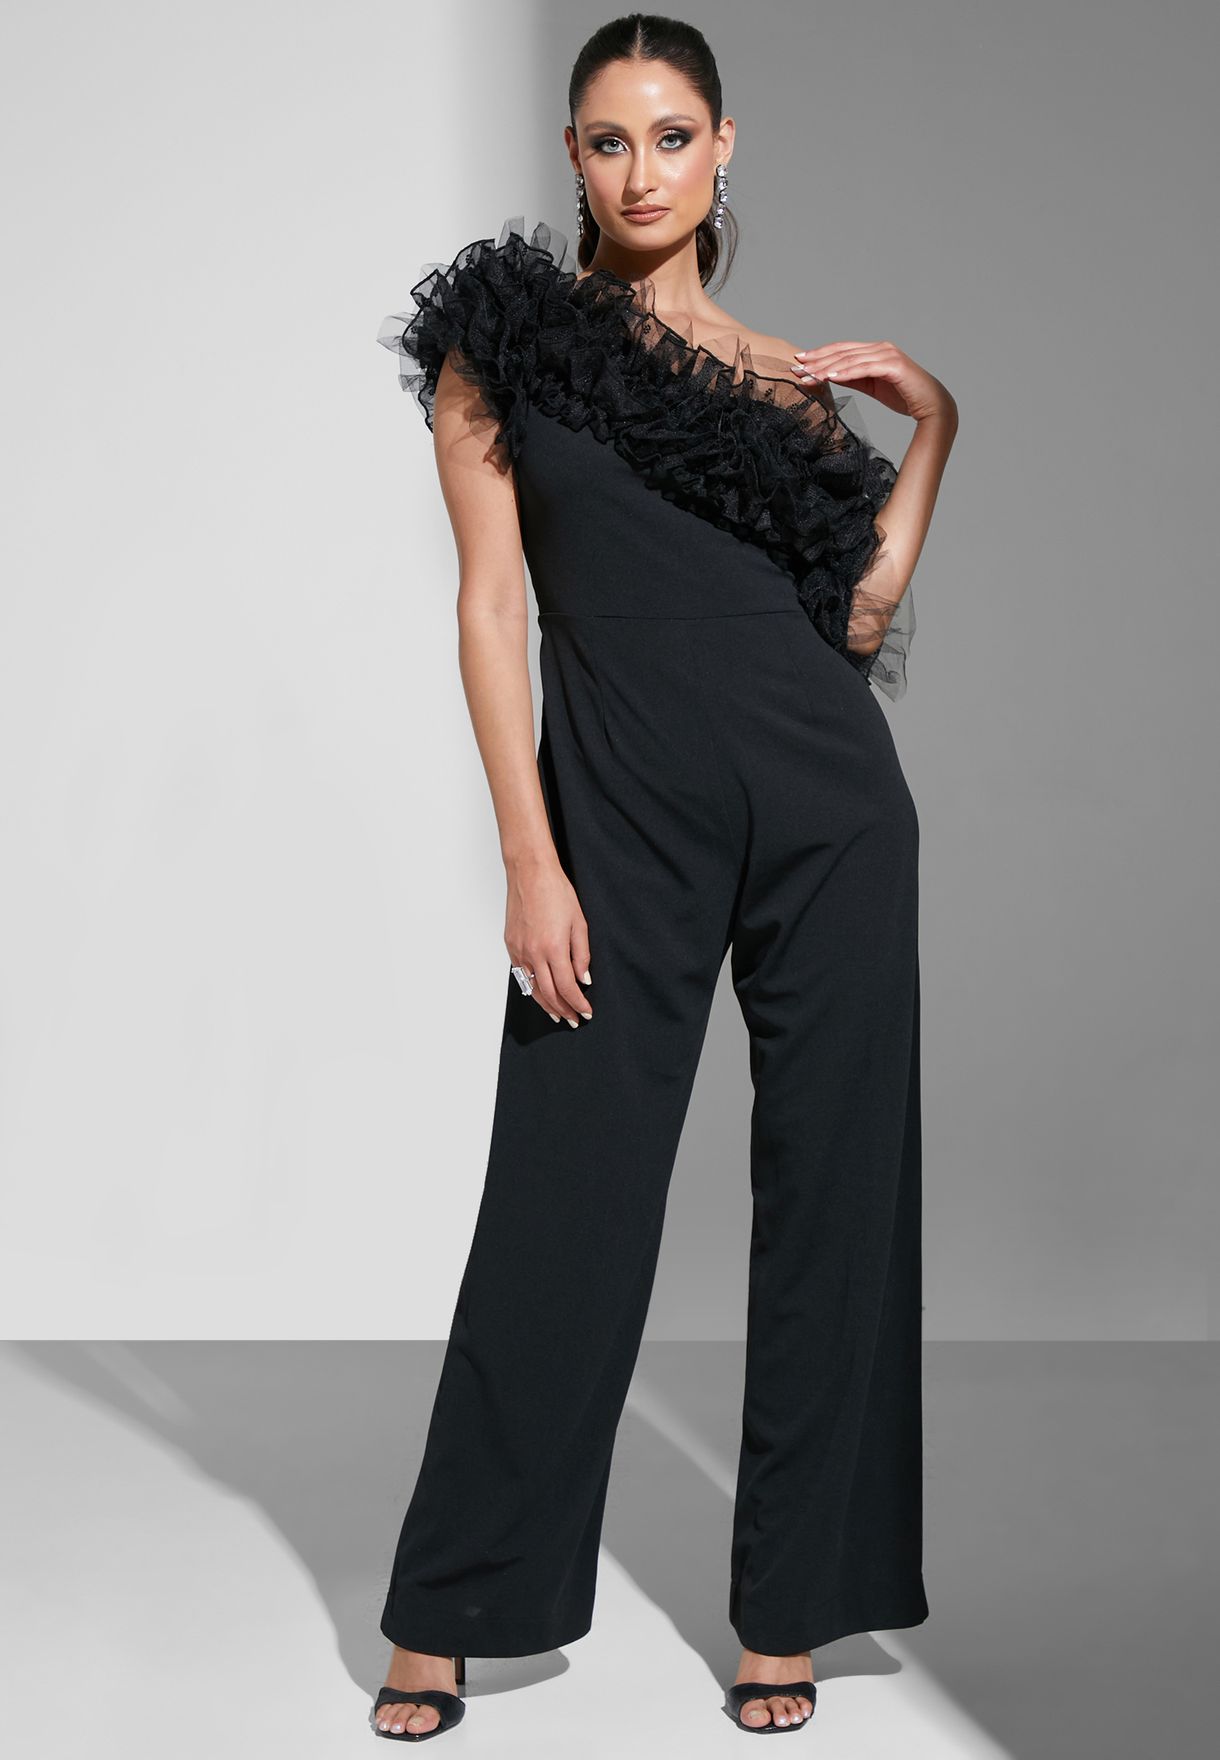 Ruffle Tulle One Shoulder Jumpsuit